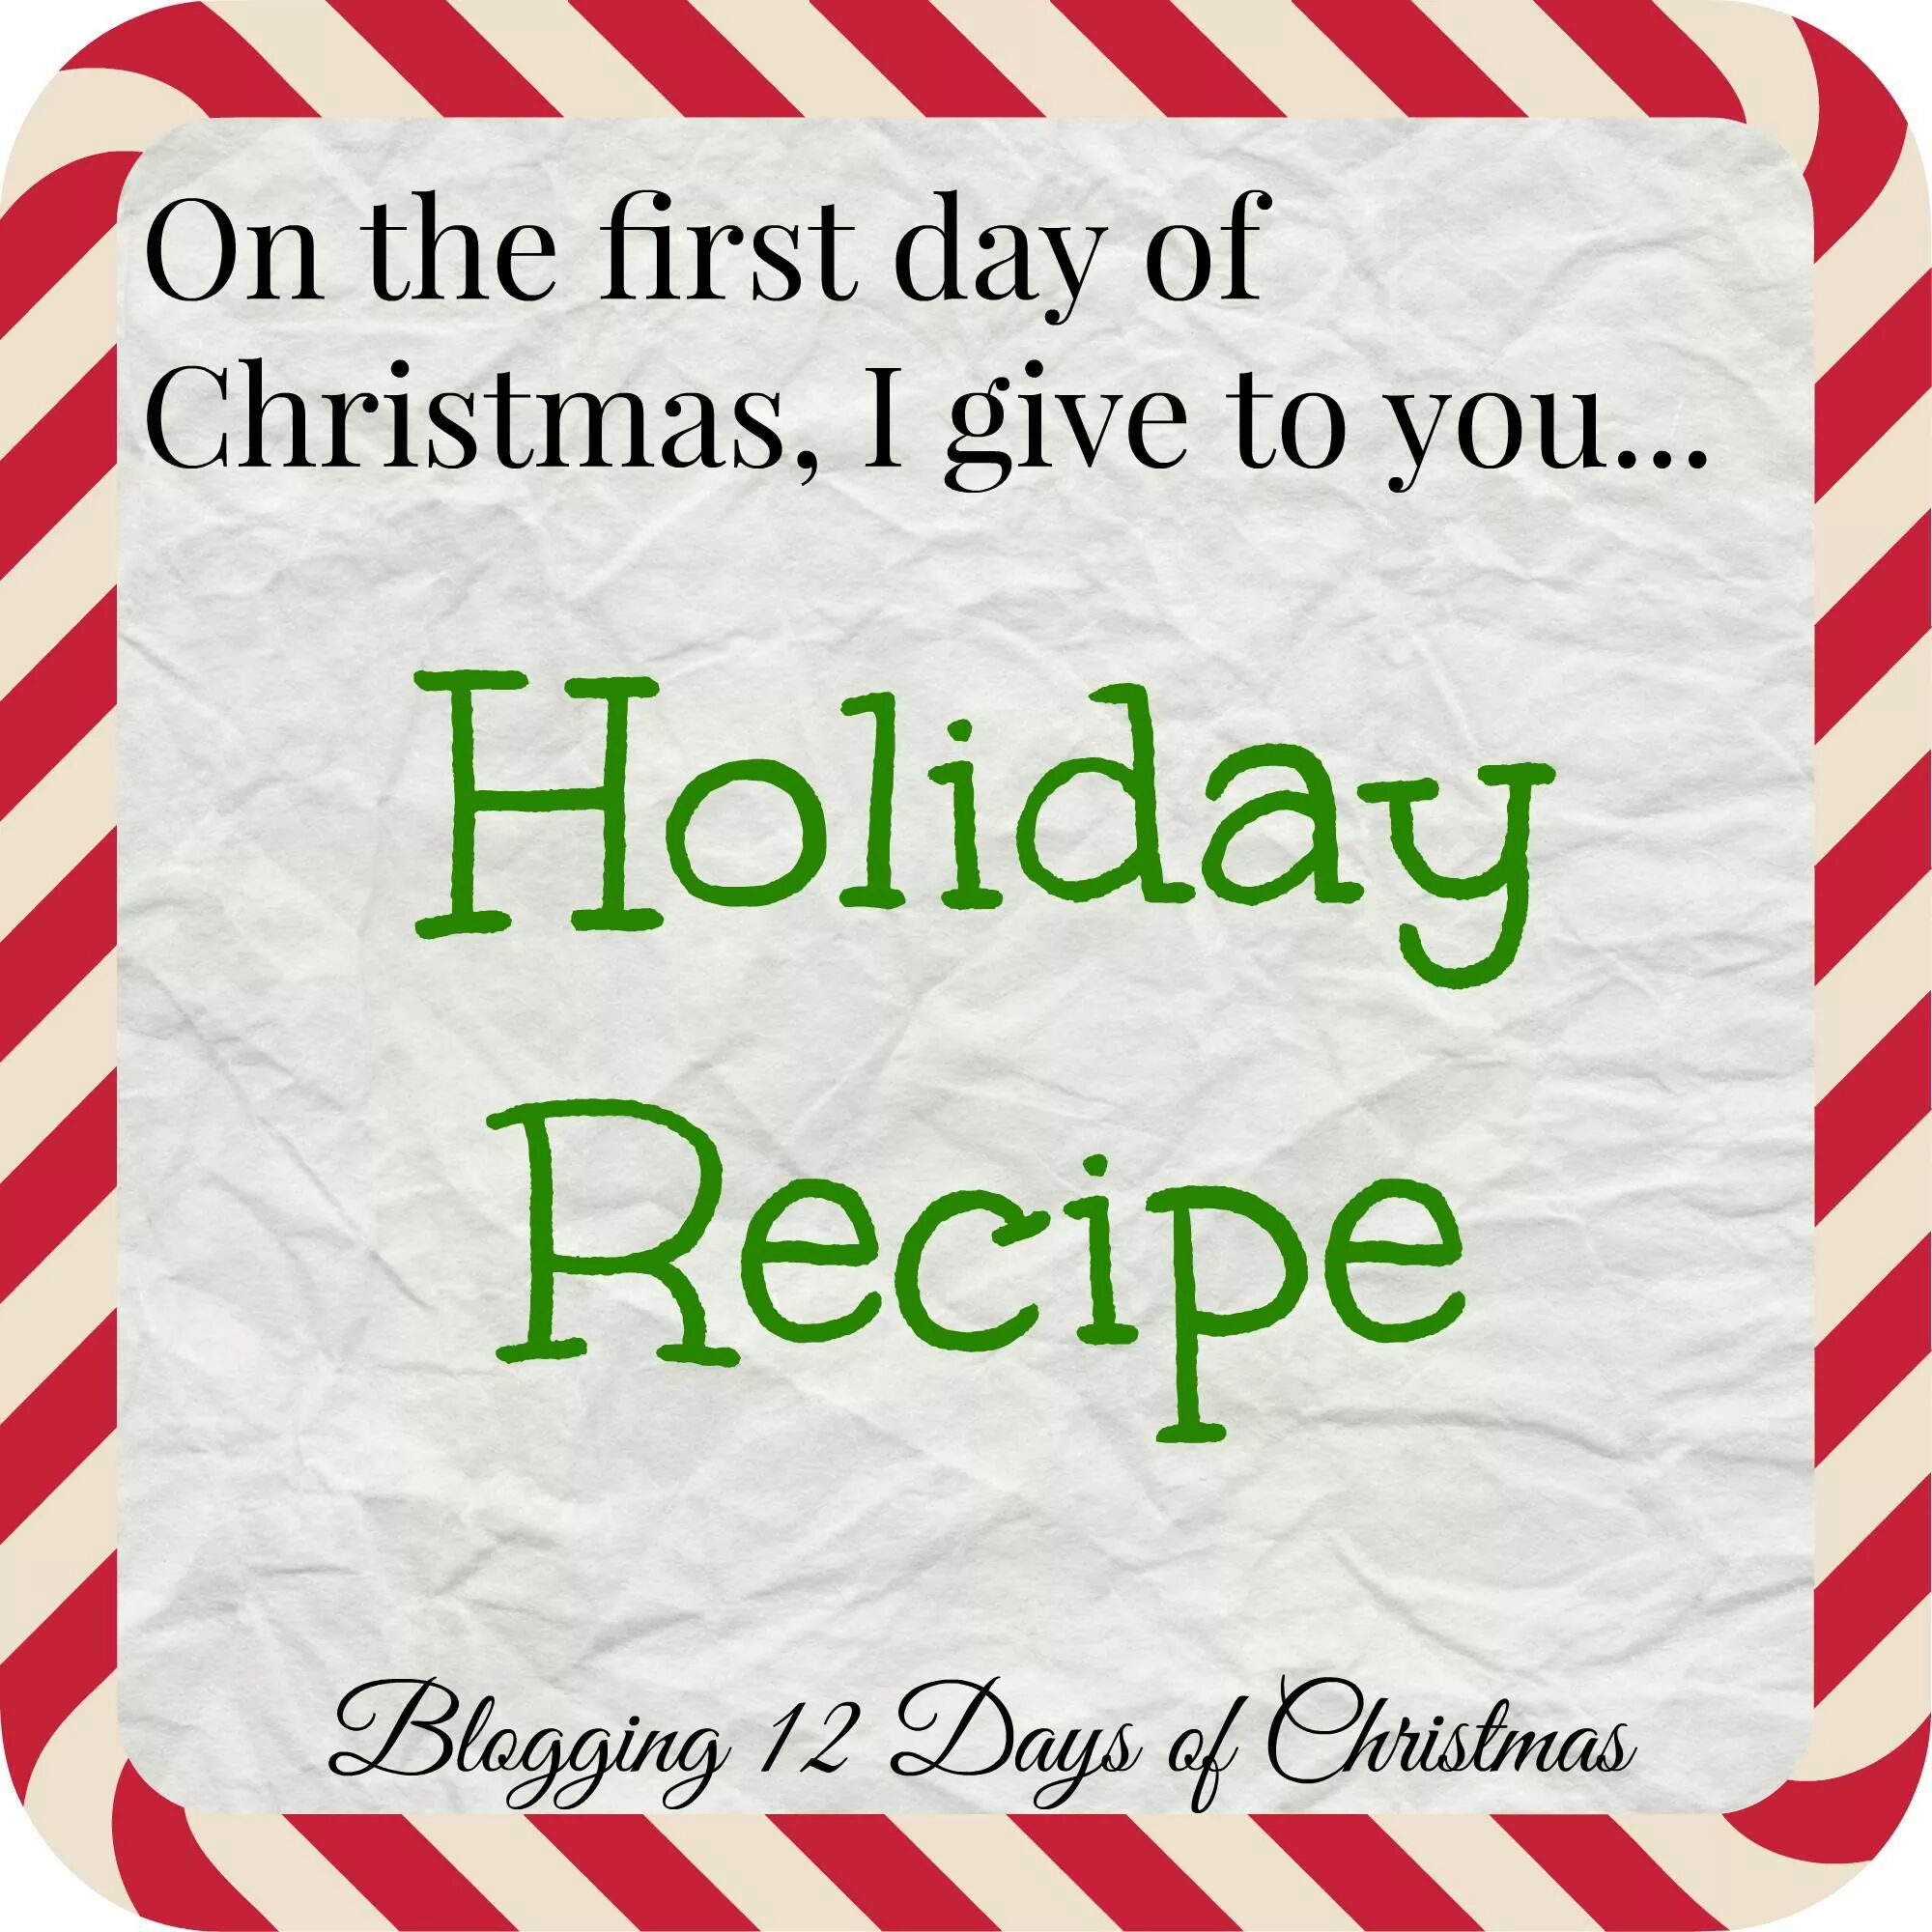 Day 1 of Blogging Christmas